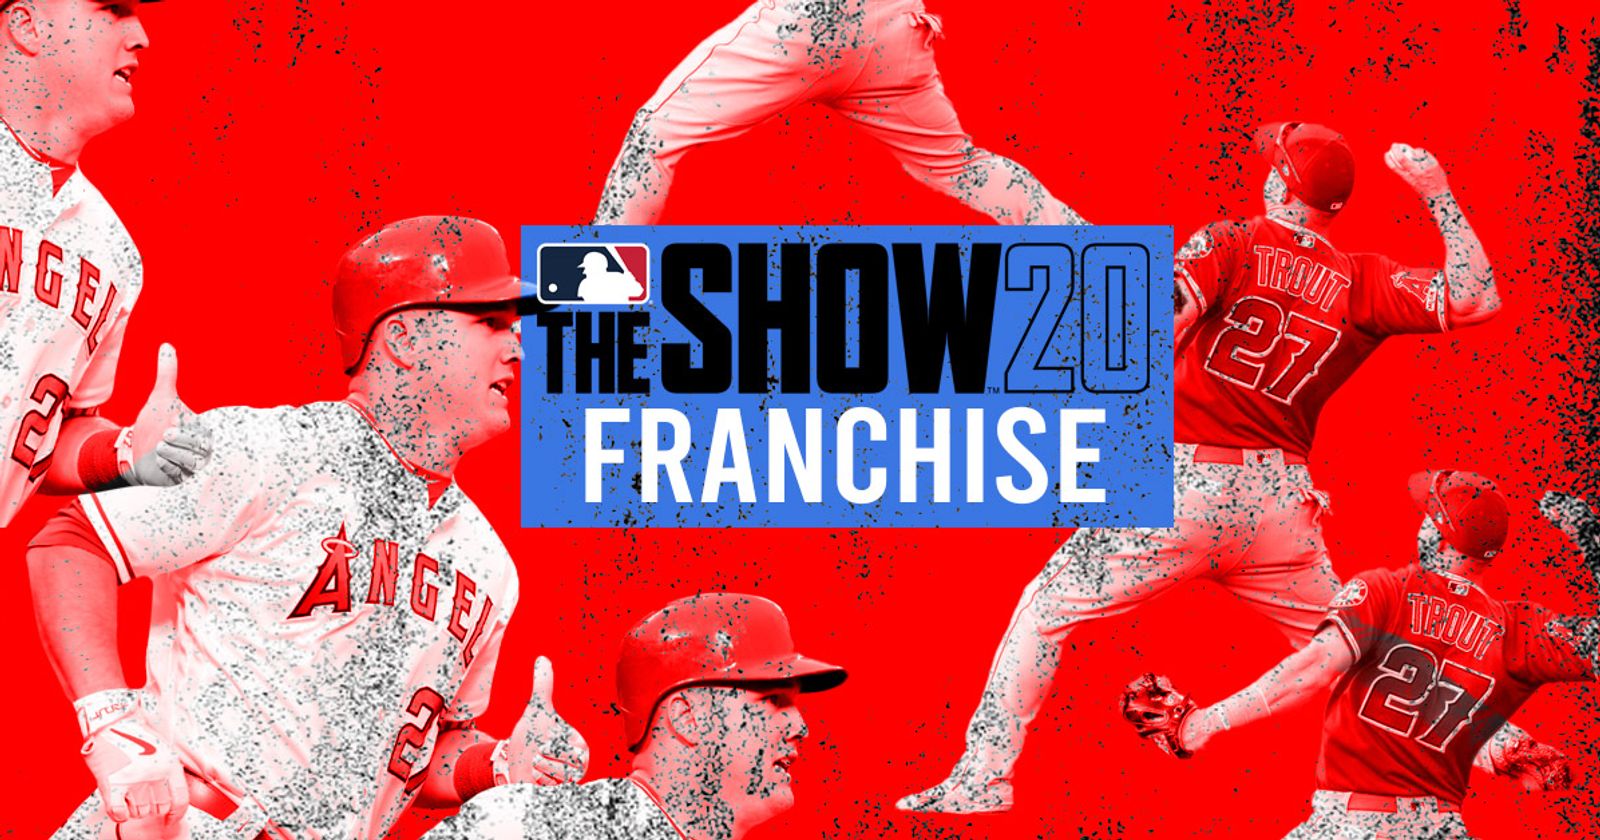 MLB The Show 20 Franchise Mode Info - Custom Teams In Franchise For The  First Time! 